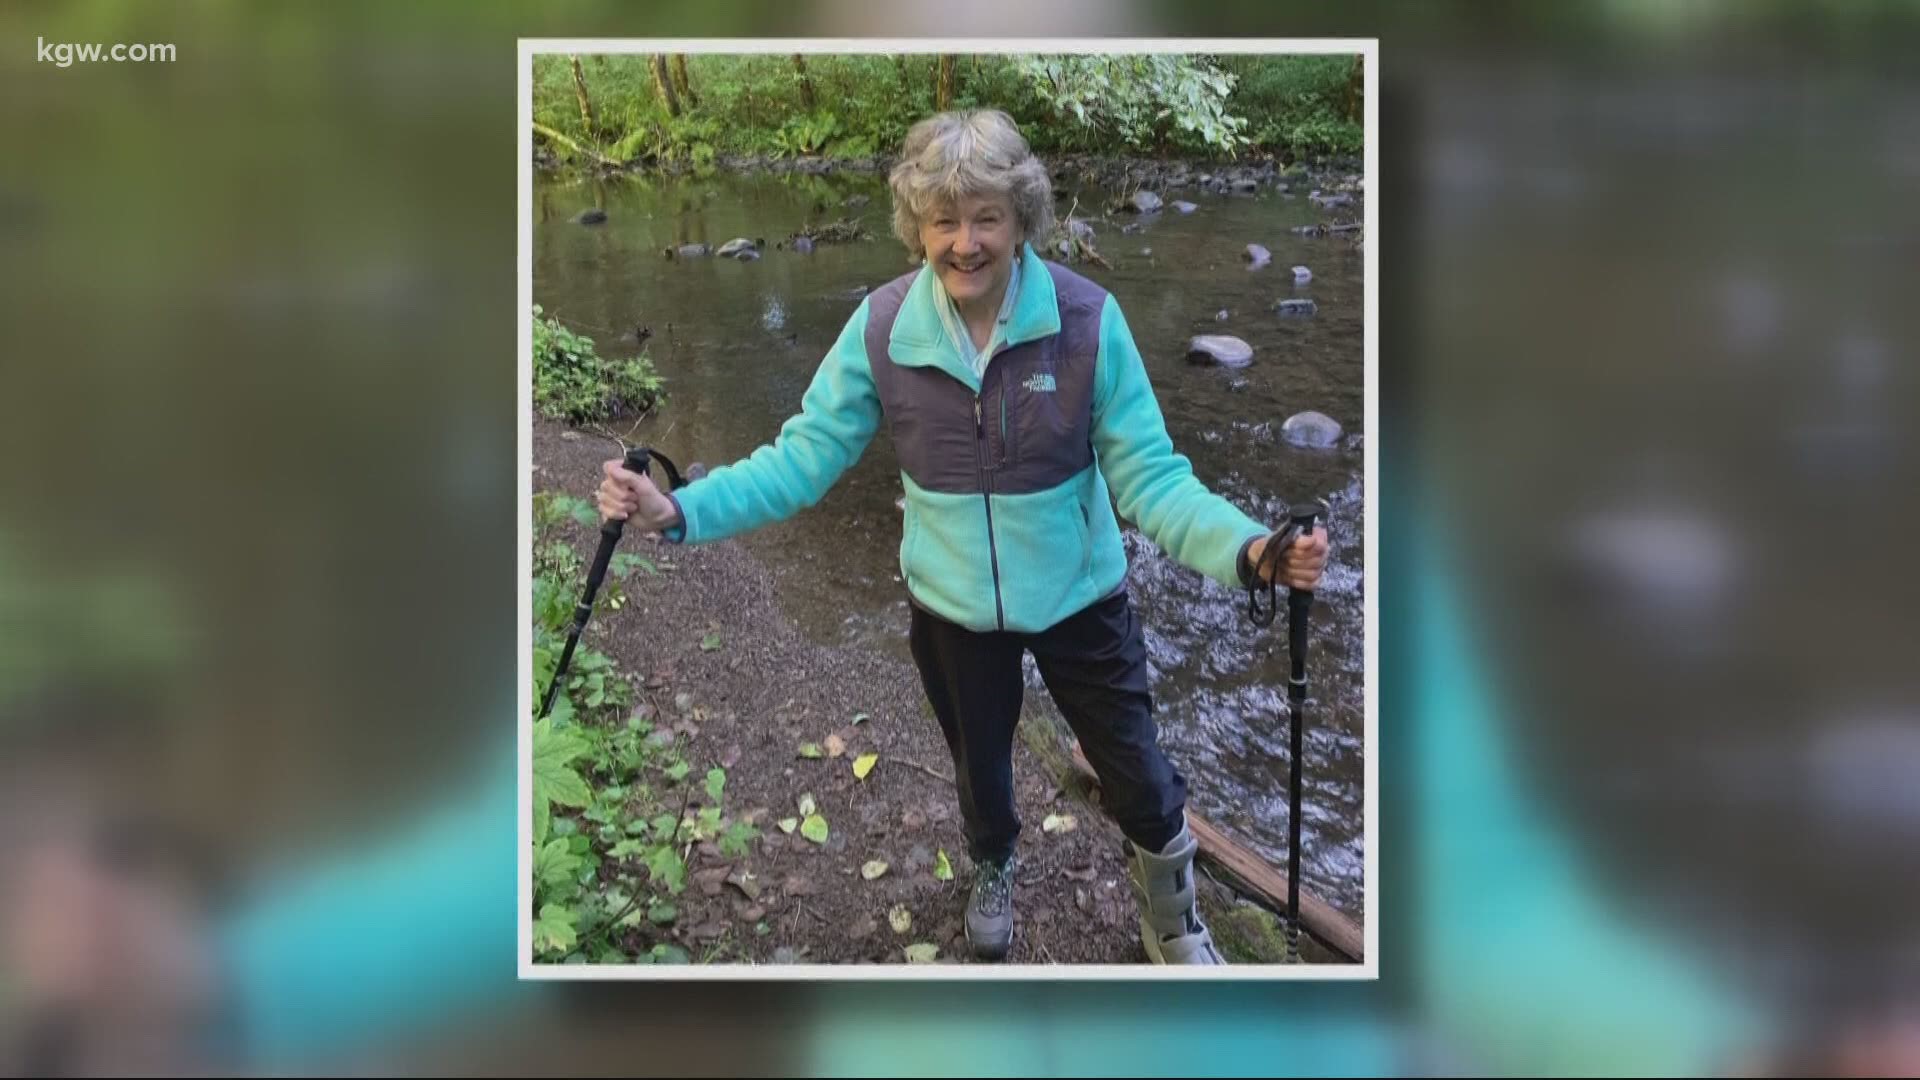 Jean Gerich, 77, was one of 10 victims in a string of hit-and-run crashes in Southeast Portland. Nine other people were wounded, according to police.